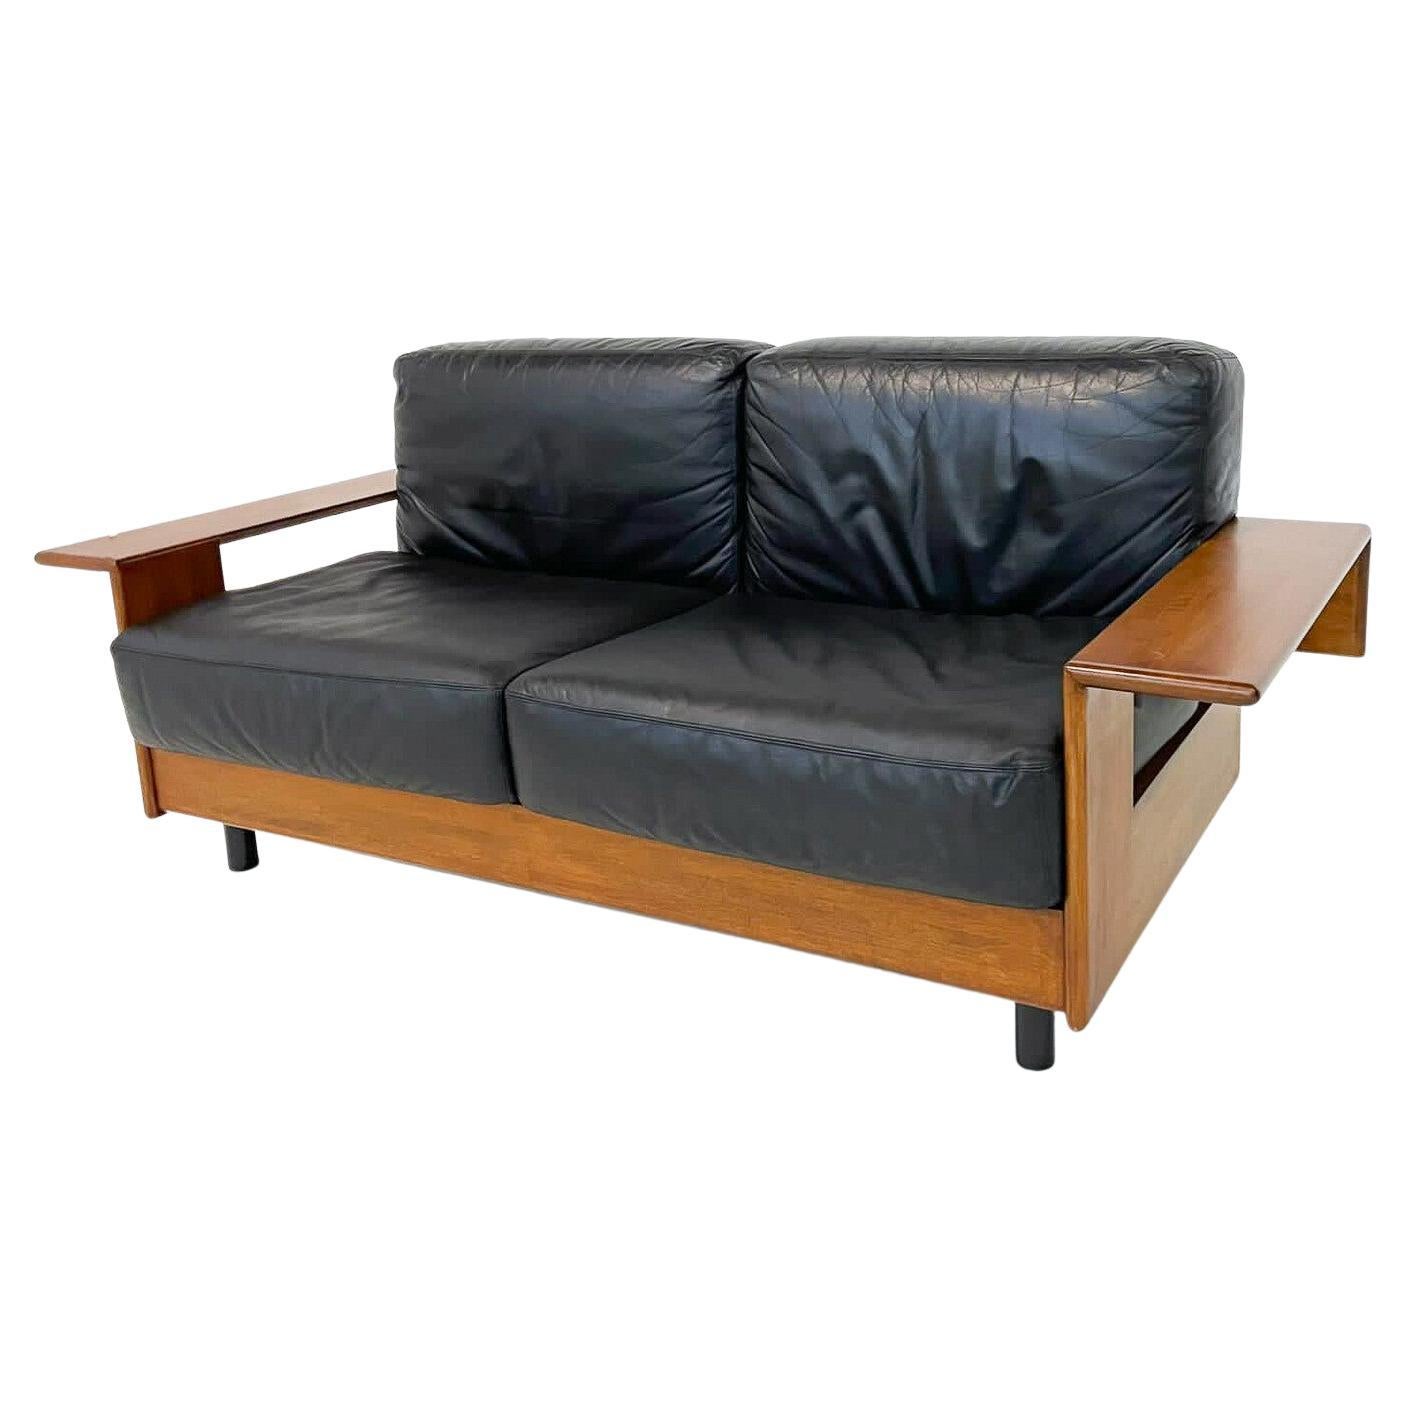 Mid-Century Modern Italian Sofa, Black Leather and Wood, 1960s, Two Available